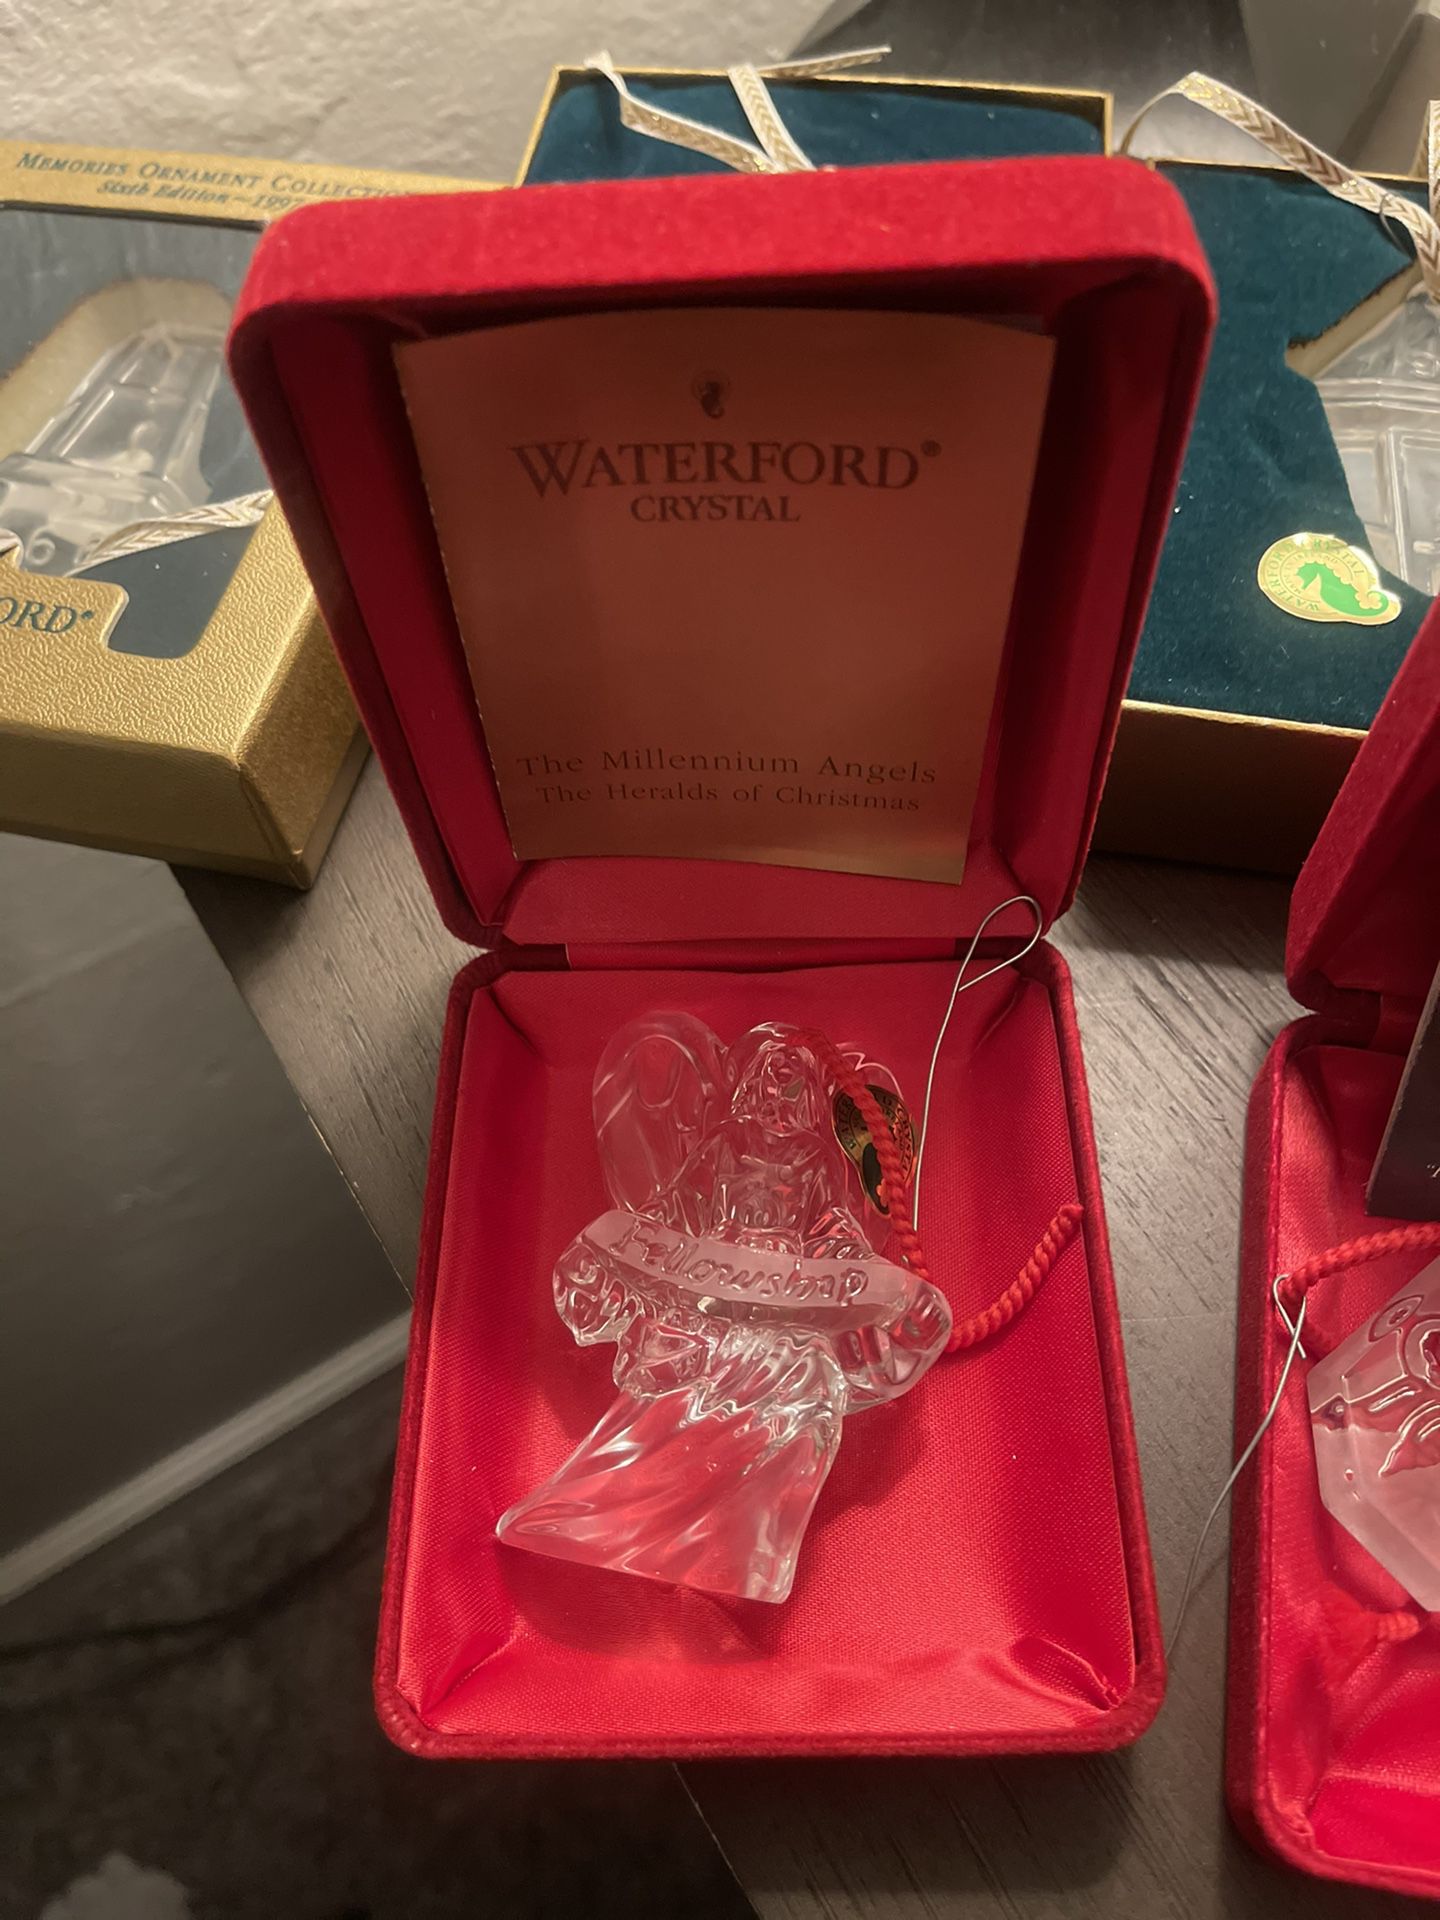 Waterford Crystal Ornaments 